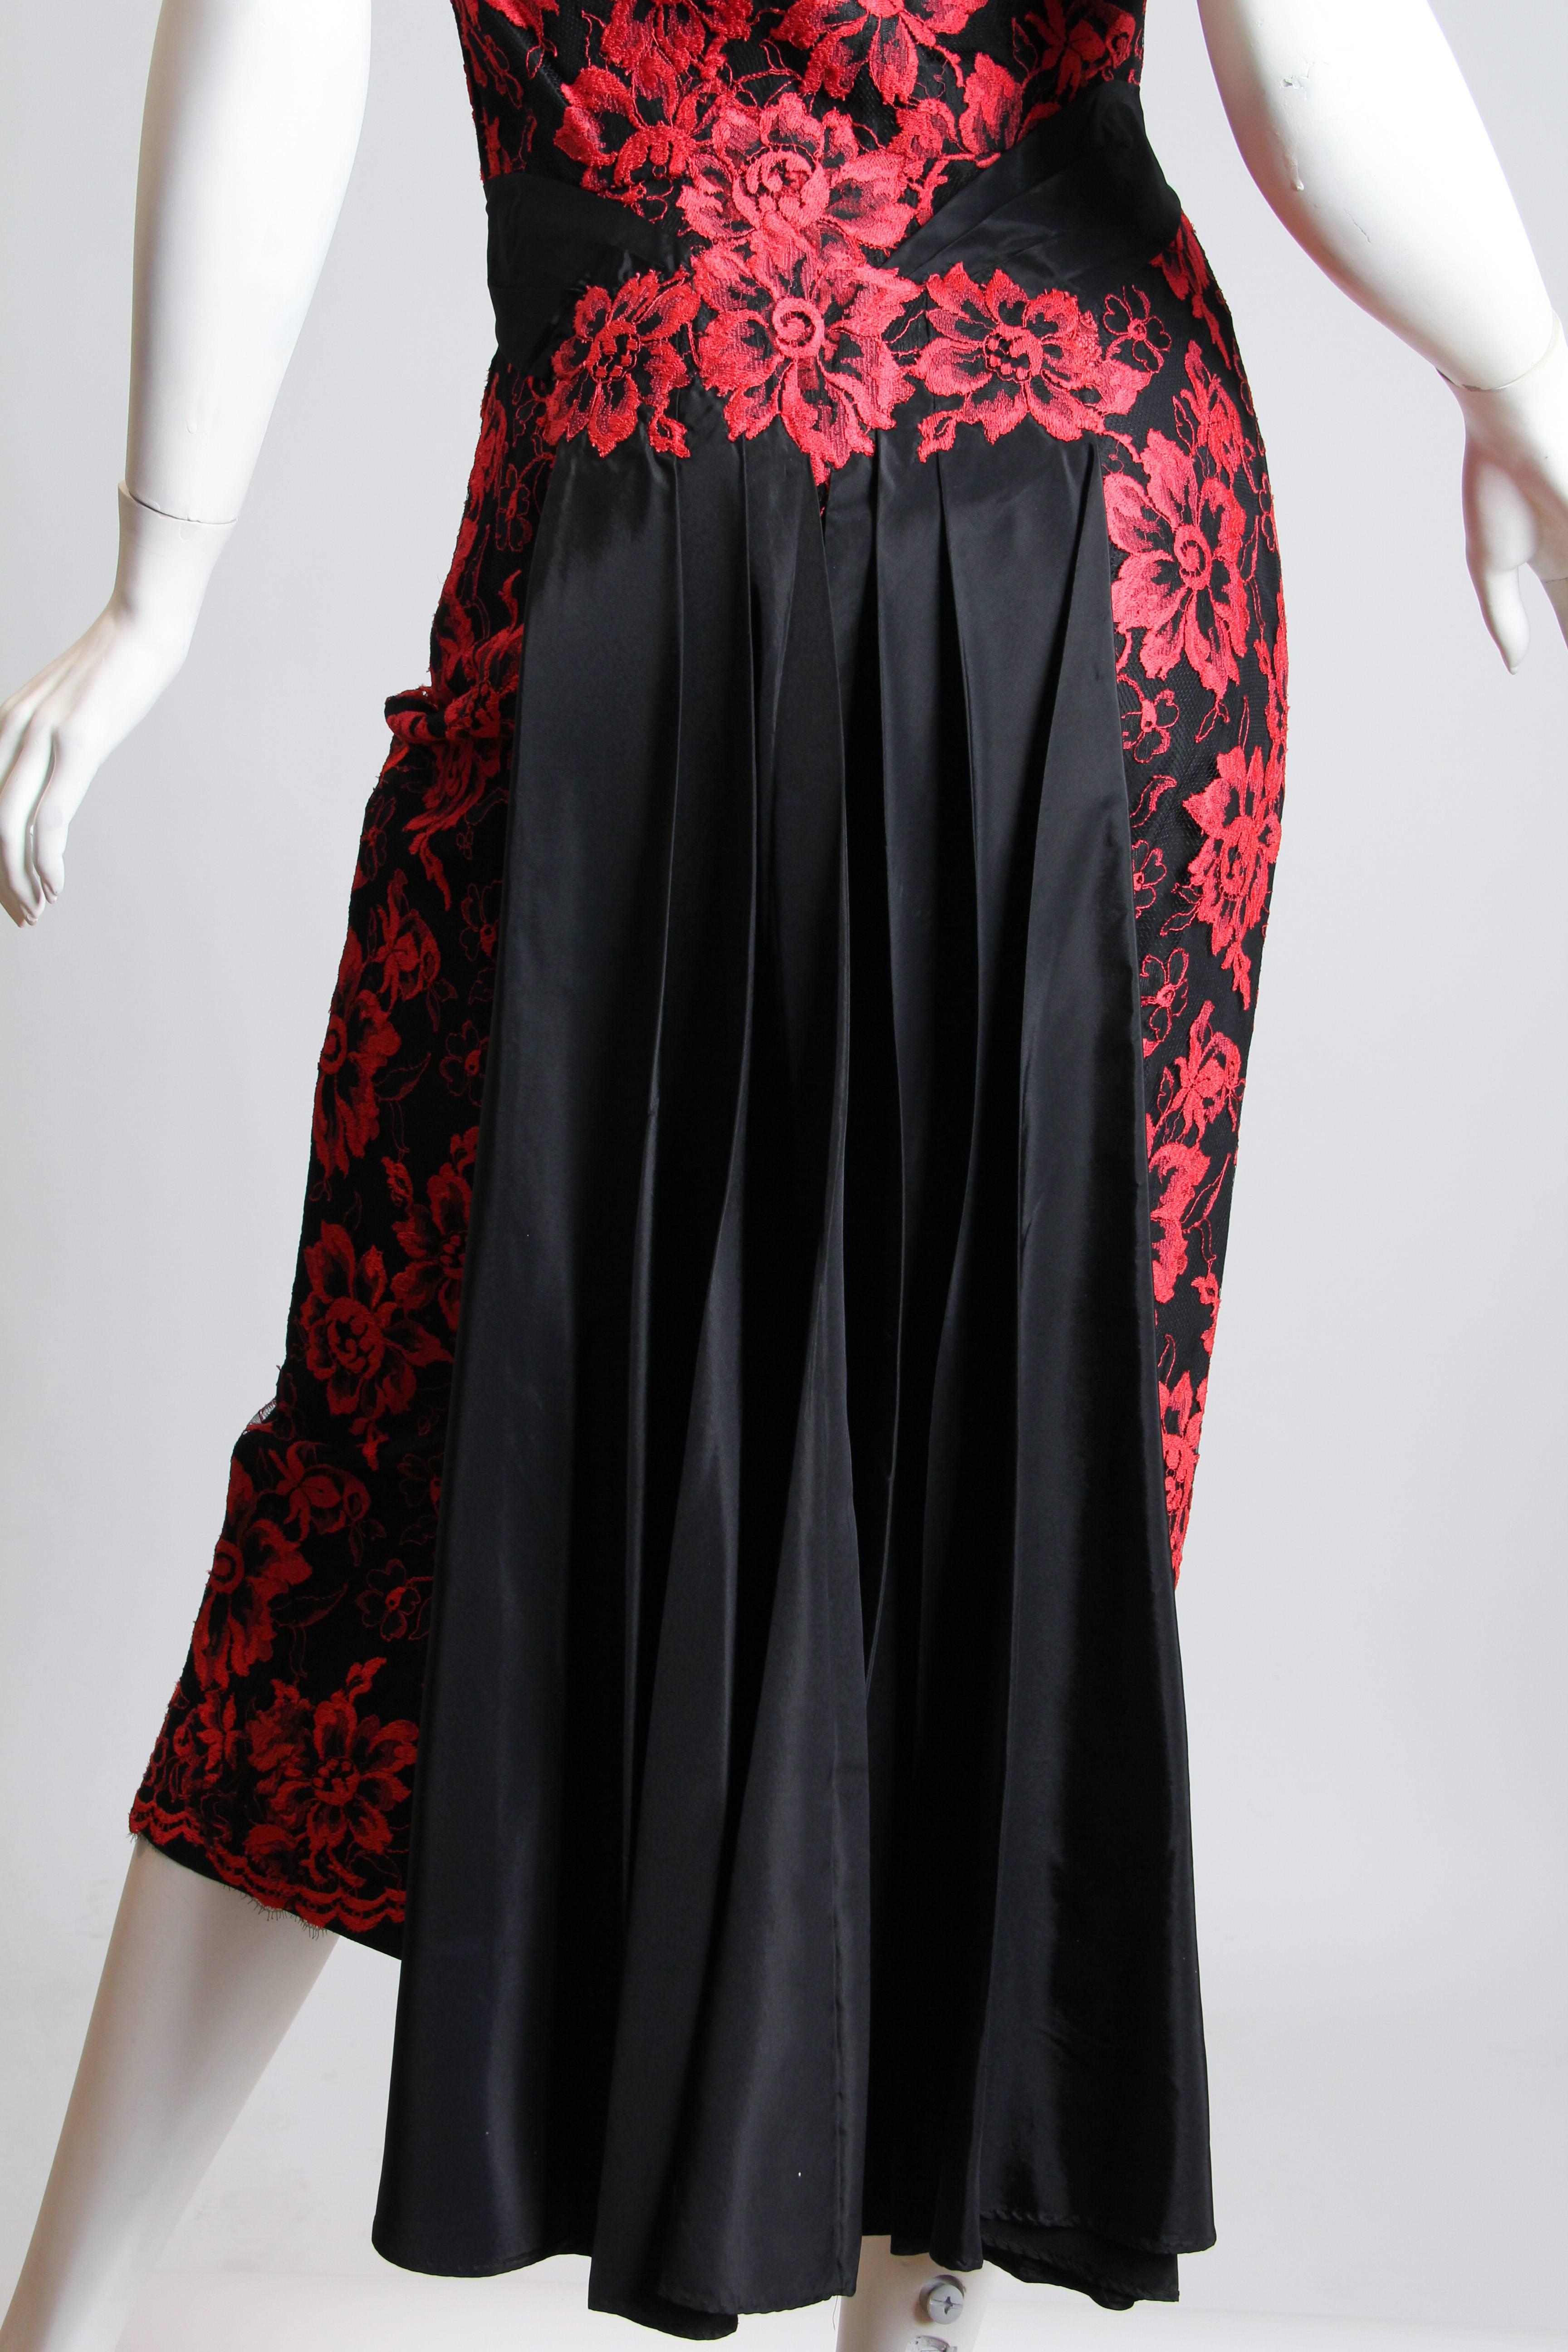 1950S PEGGY HUNT Black & Red Silk Taffeta Chantilly Lace Cocktail Dress In Excellent Condition For Sale In New York, NY